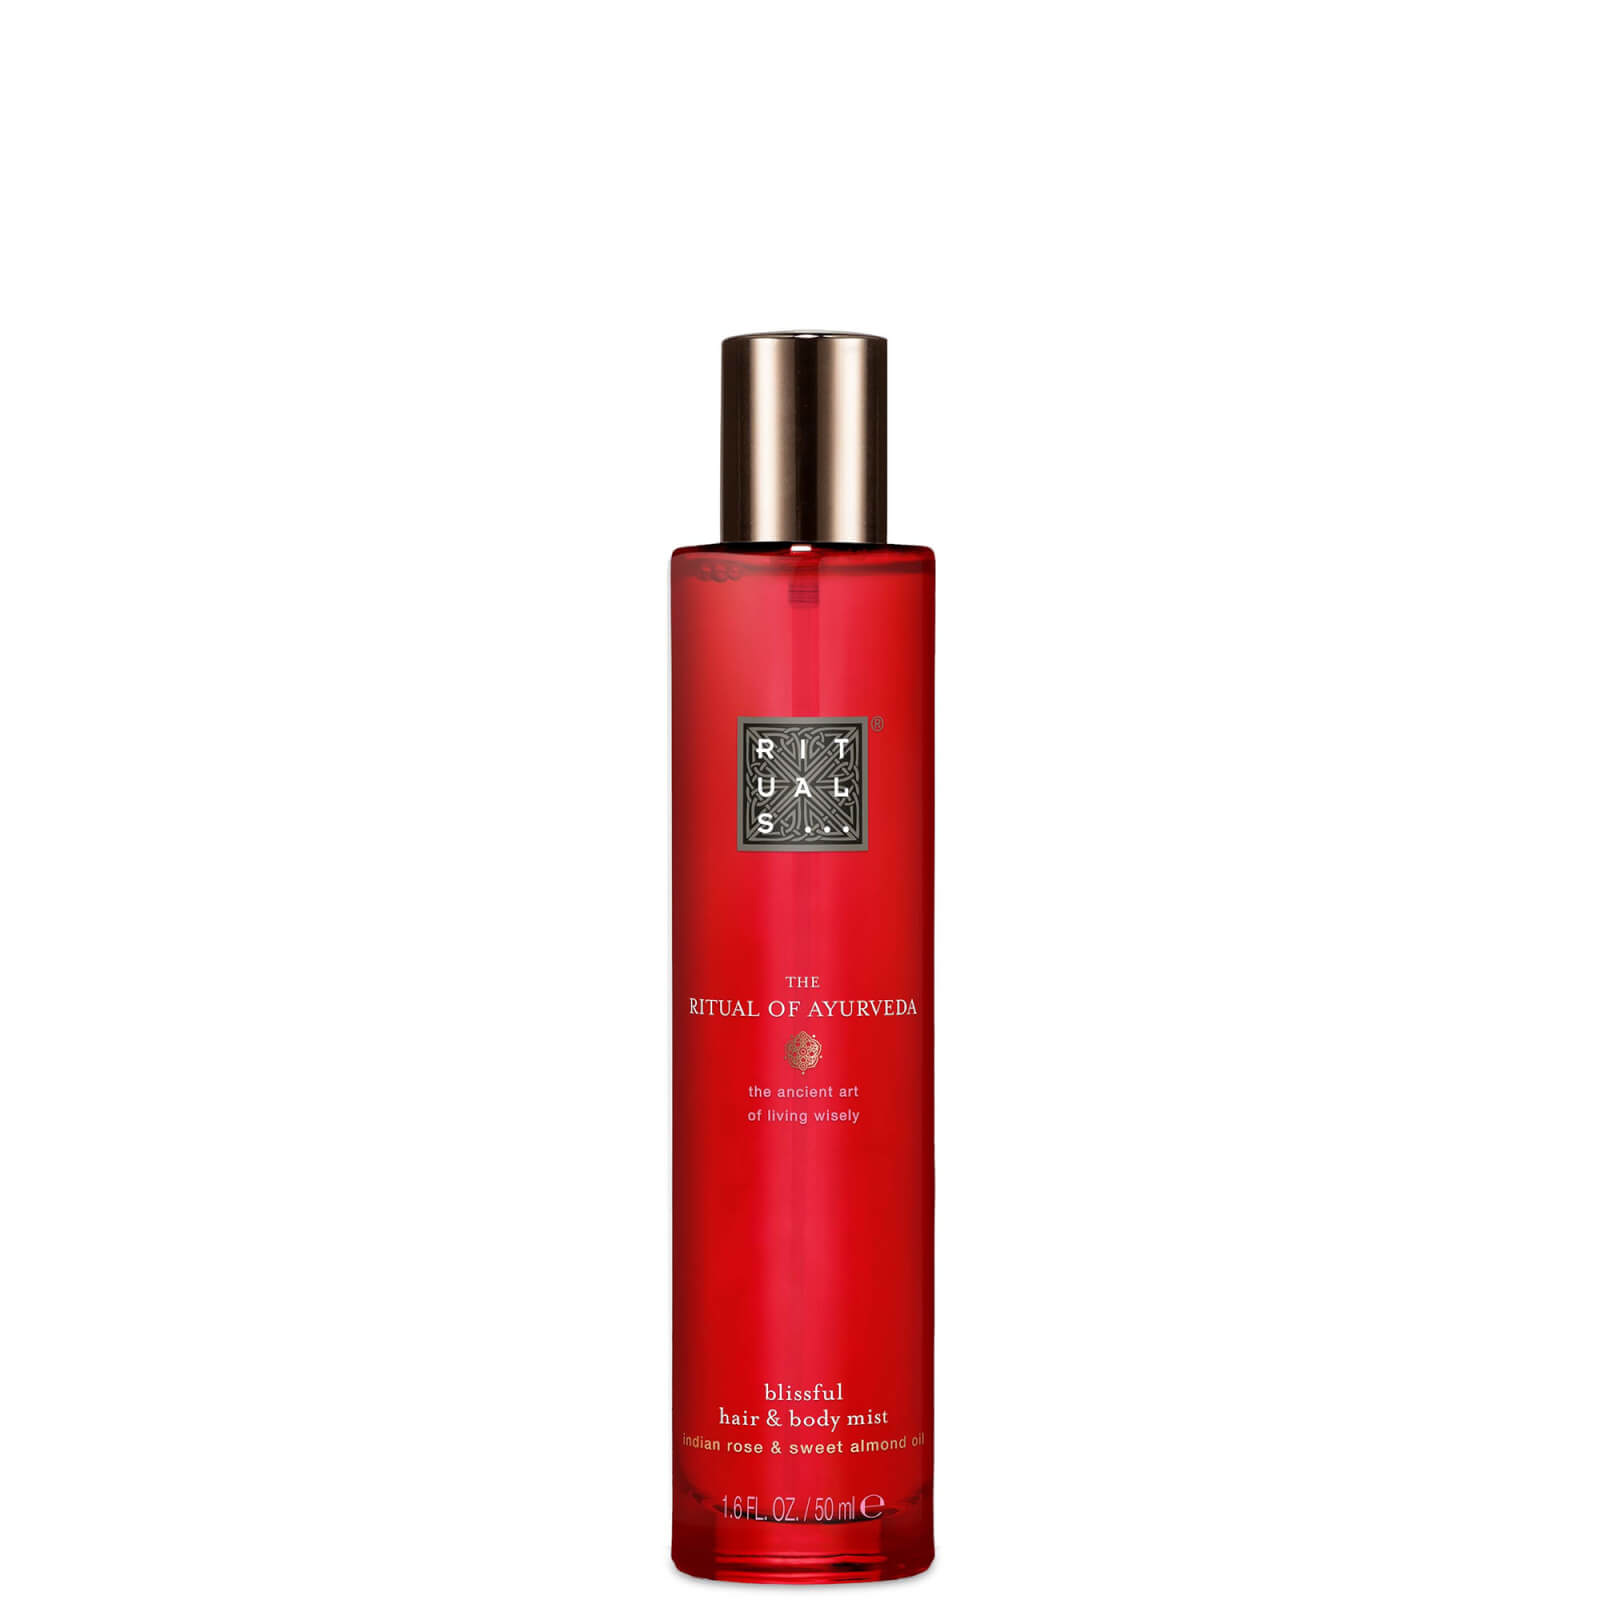 Image of Rituals The Ritual of Ayurveda Sweet Almond & Indian Rose Hair and Body Mist 50ml